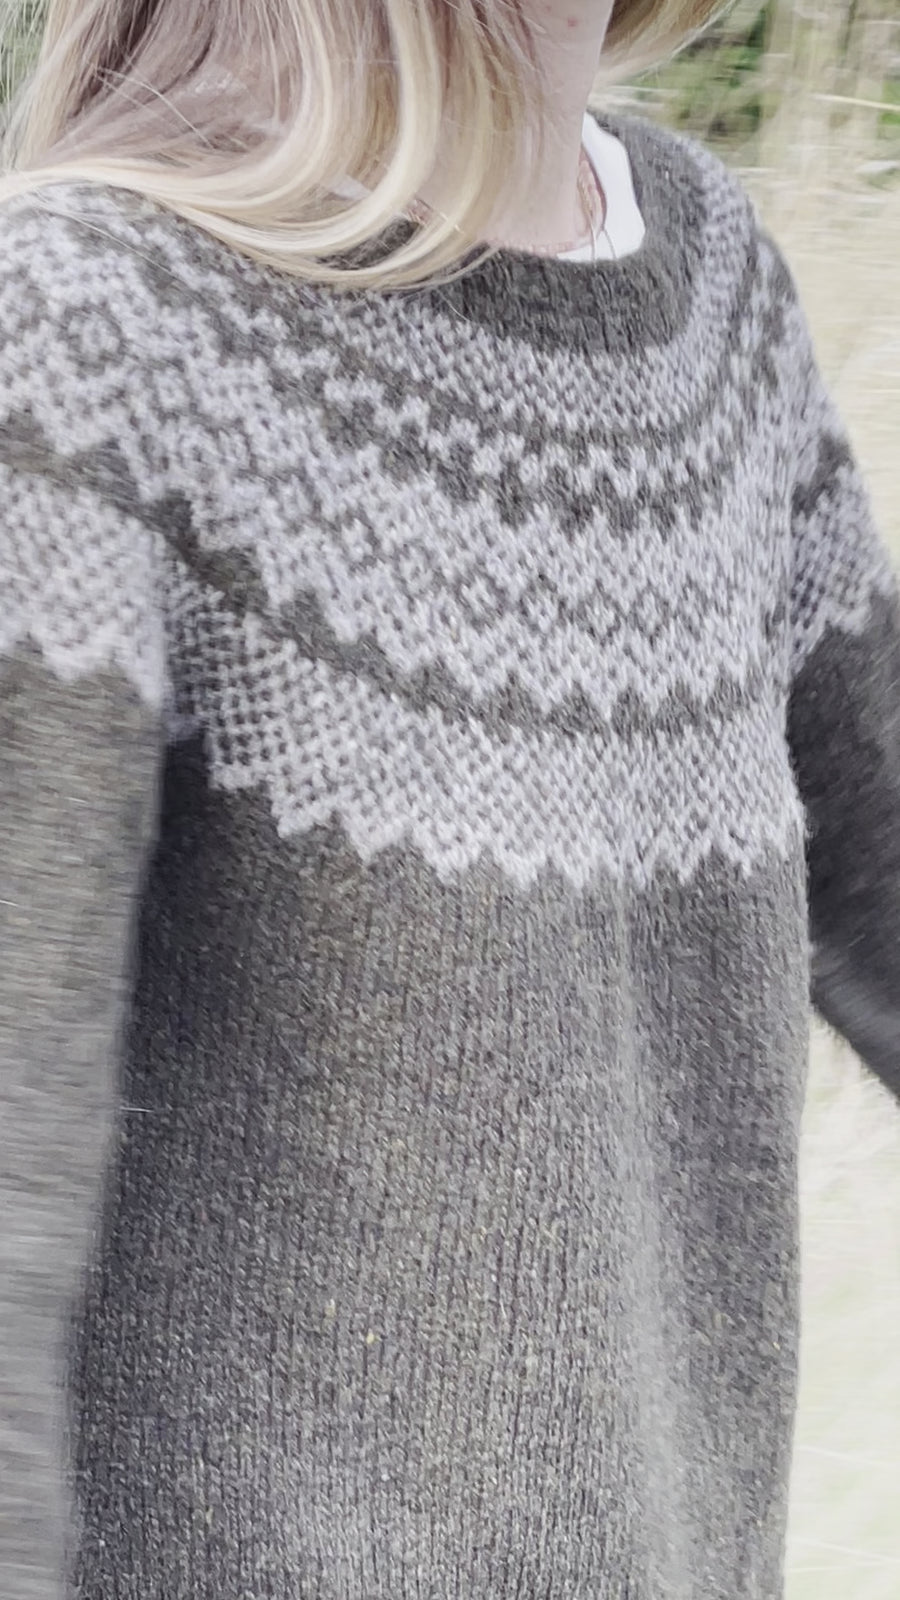 Biches & Bûches The Afterparty Sweater - pdf pattern in Korean